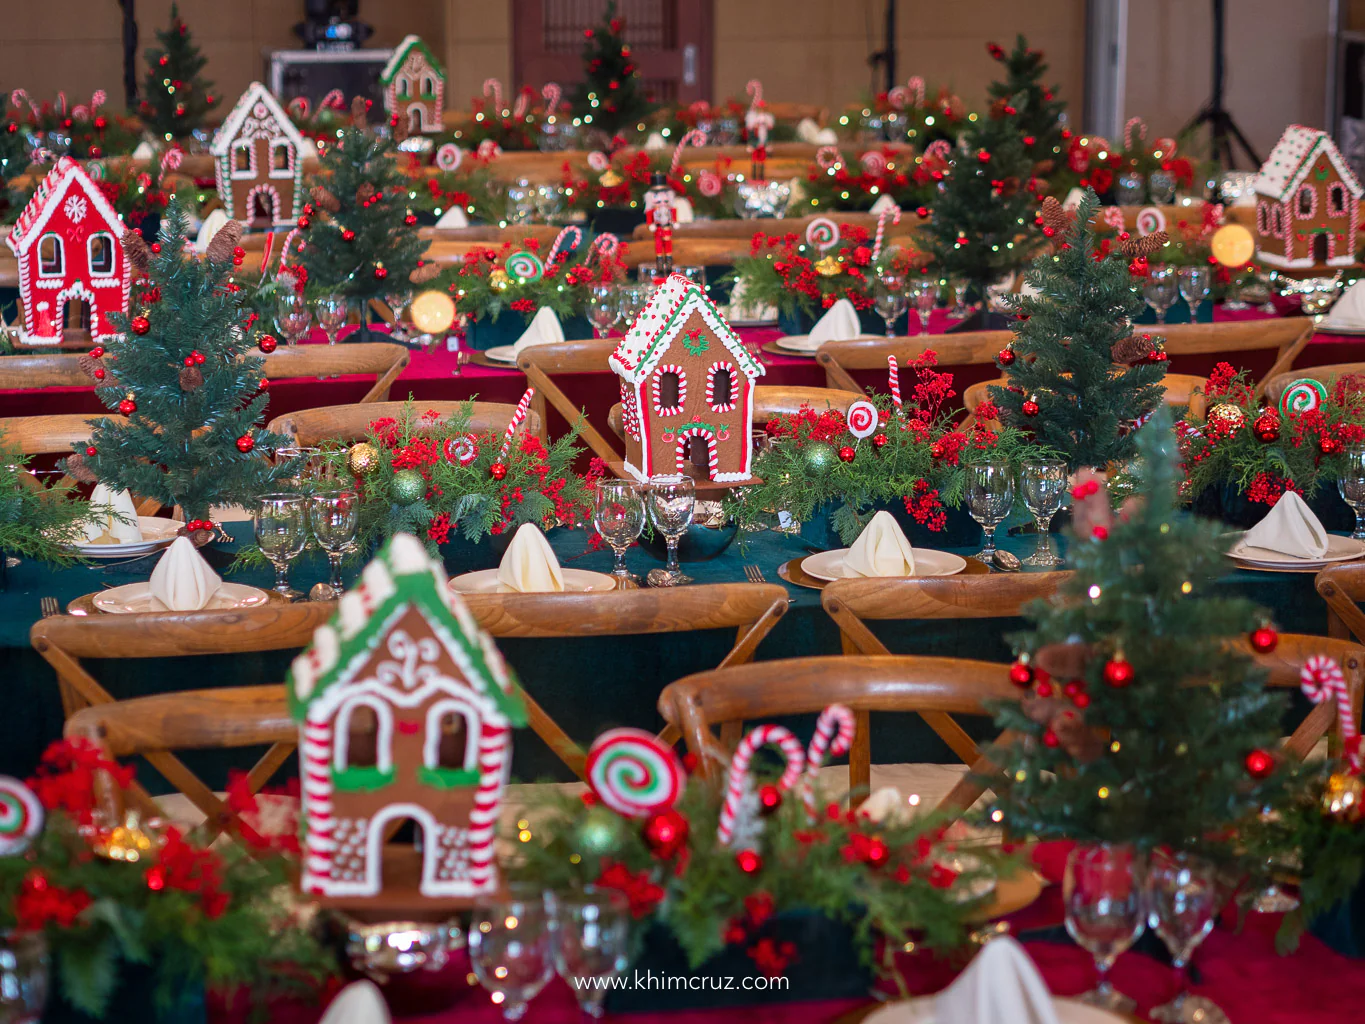 Christmas village gingerbread house and nutcracker table centerpiece for a kids birthday bash